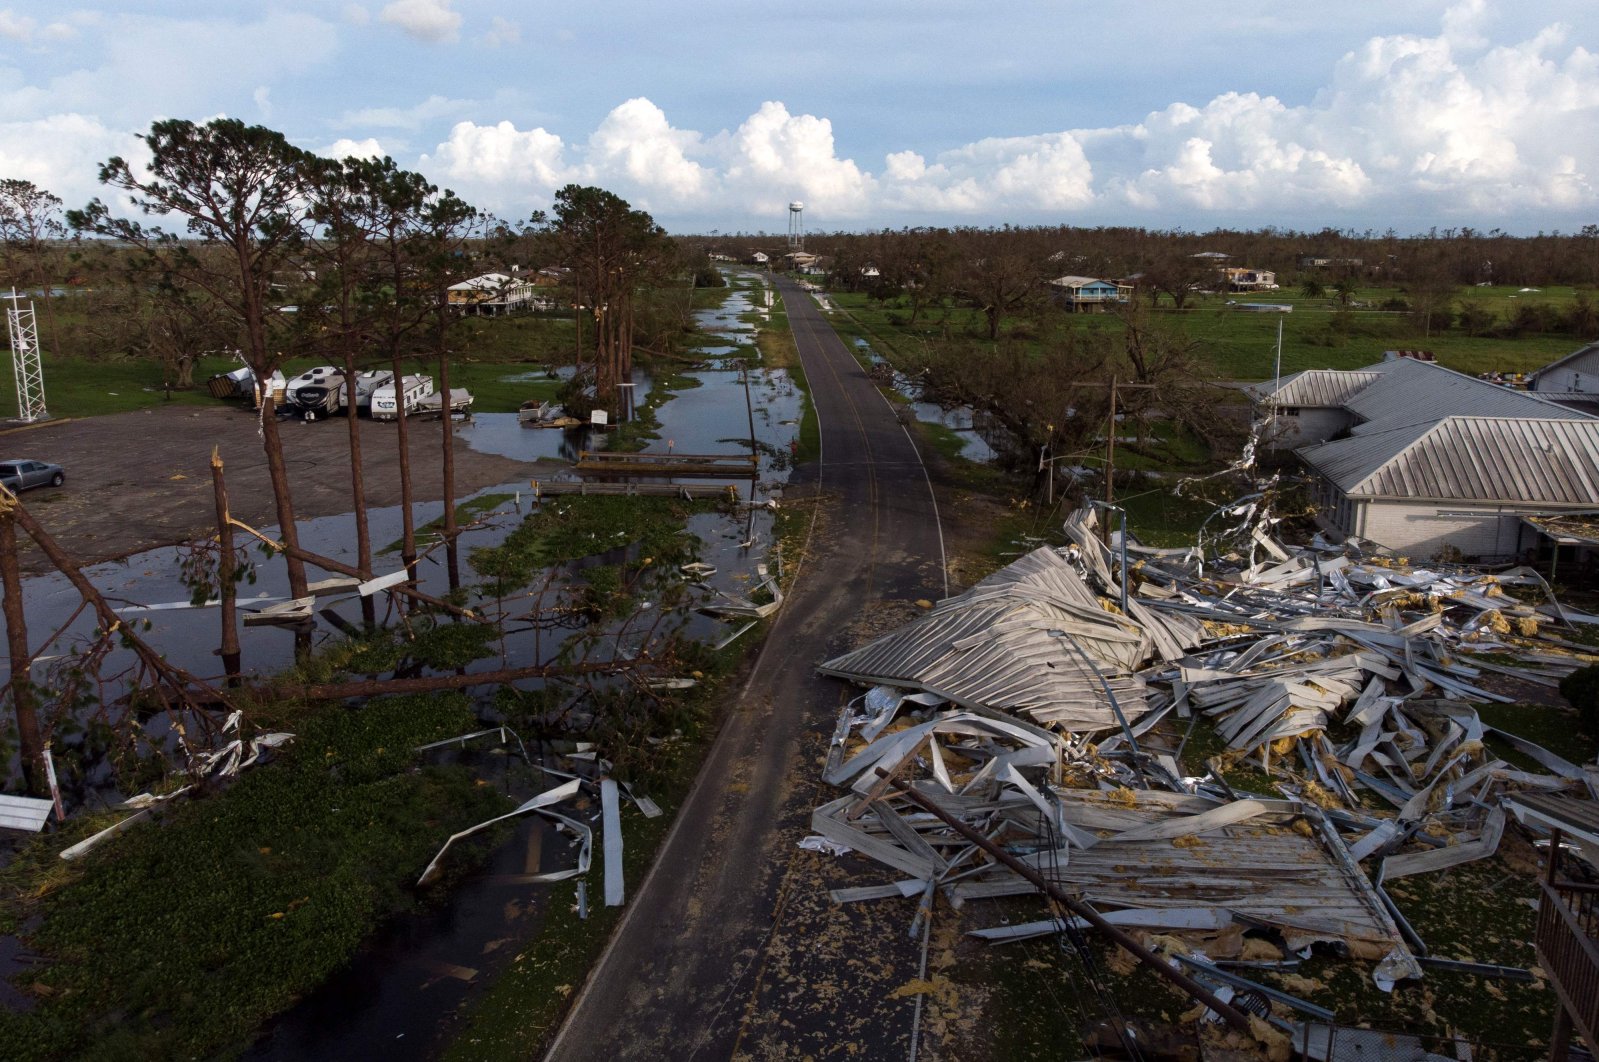 Damage in the city of Pointe-Aux-Chenes after Hurricane Ida made landfall, near Montegut, Louisiana, U.S., Aug. 30, 2021. (AFP Photo)